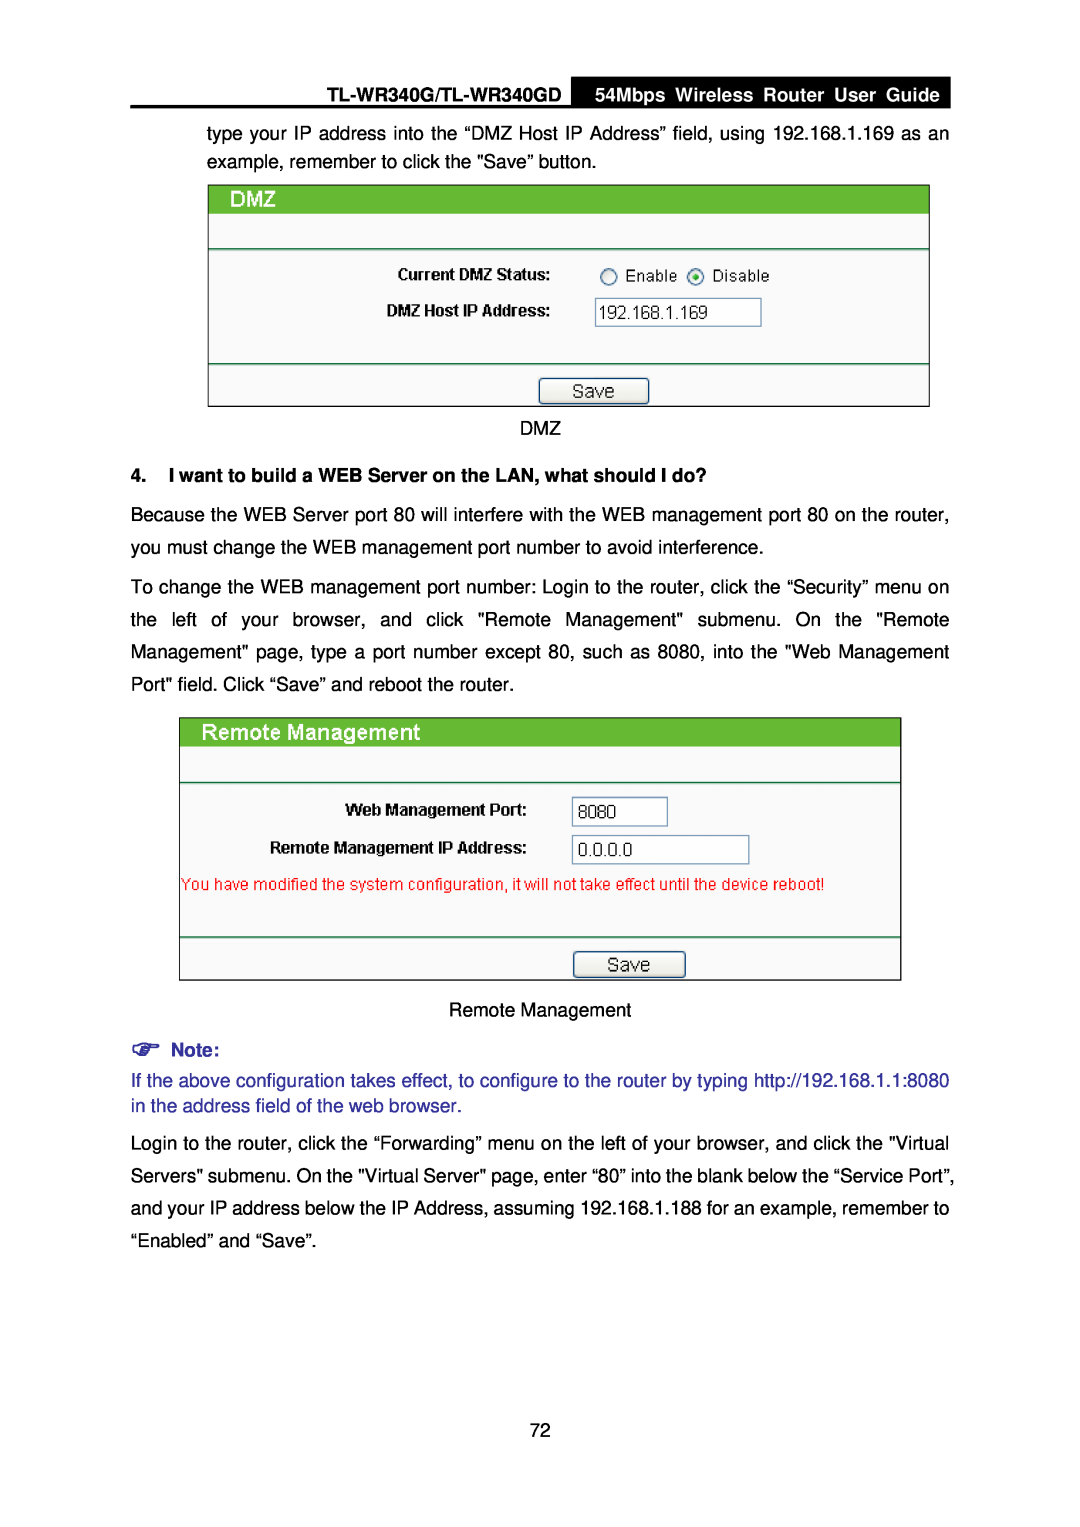 TP-Link manual TL-WR340G/TL-WR340GD, 54Mbps Wireless Router User Guide, Remote Management 